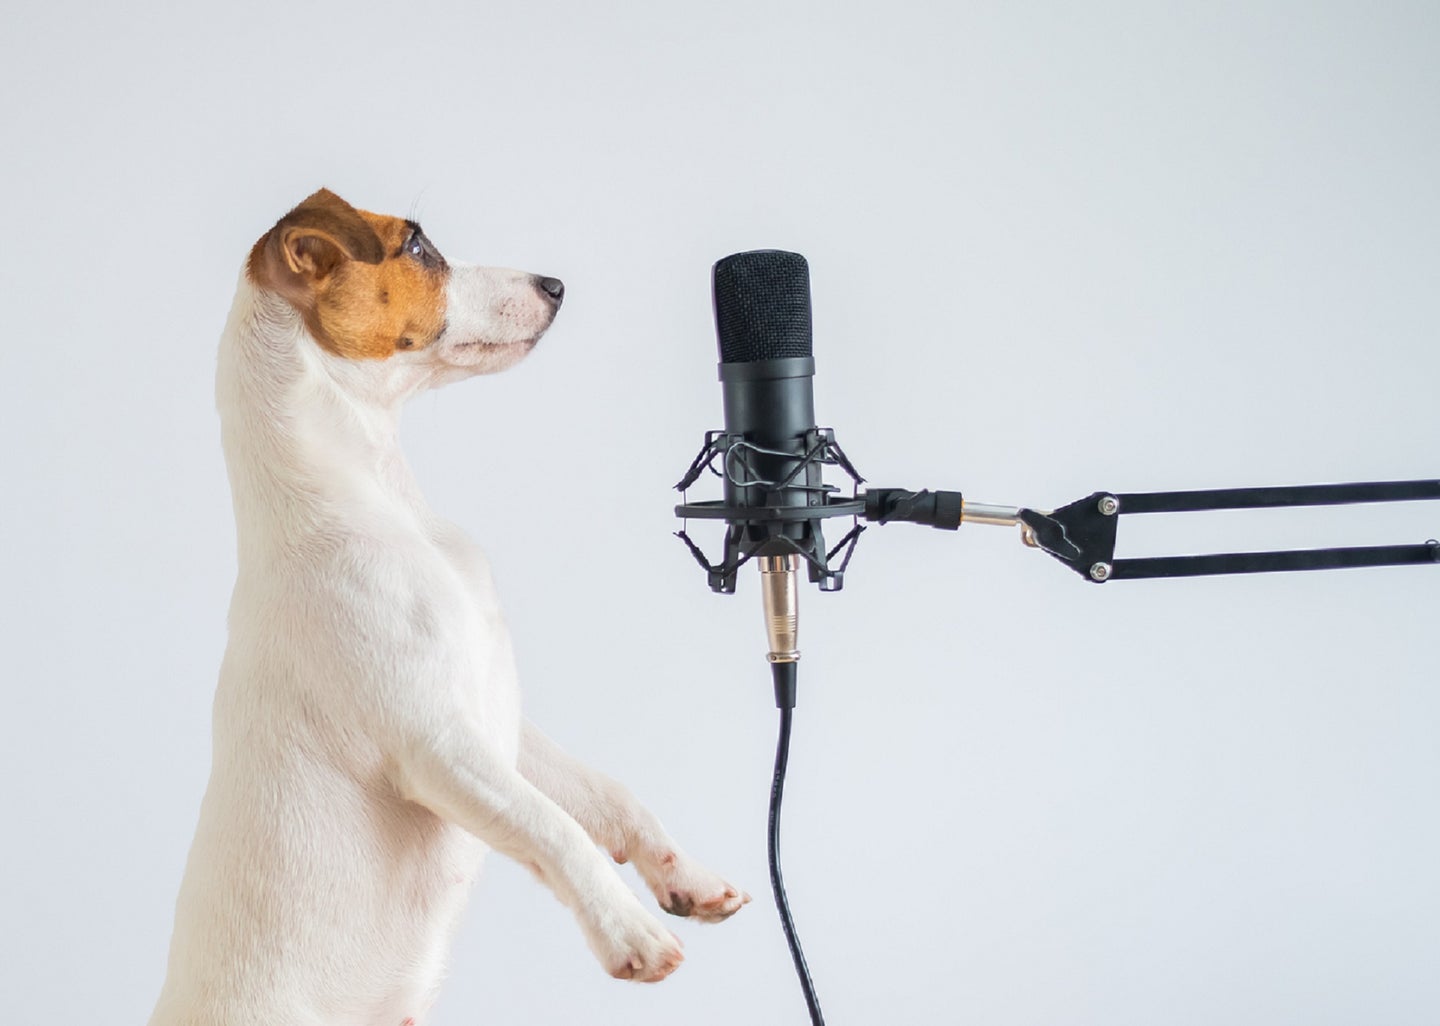 Jack Russell terrier dog facing a podcast microphone to record a science show